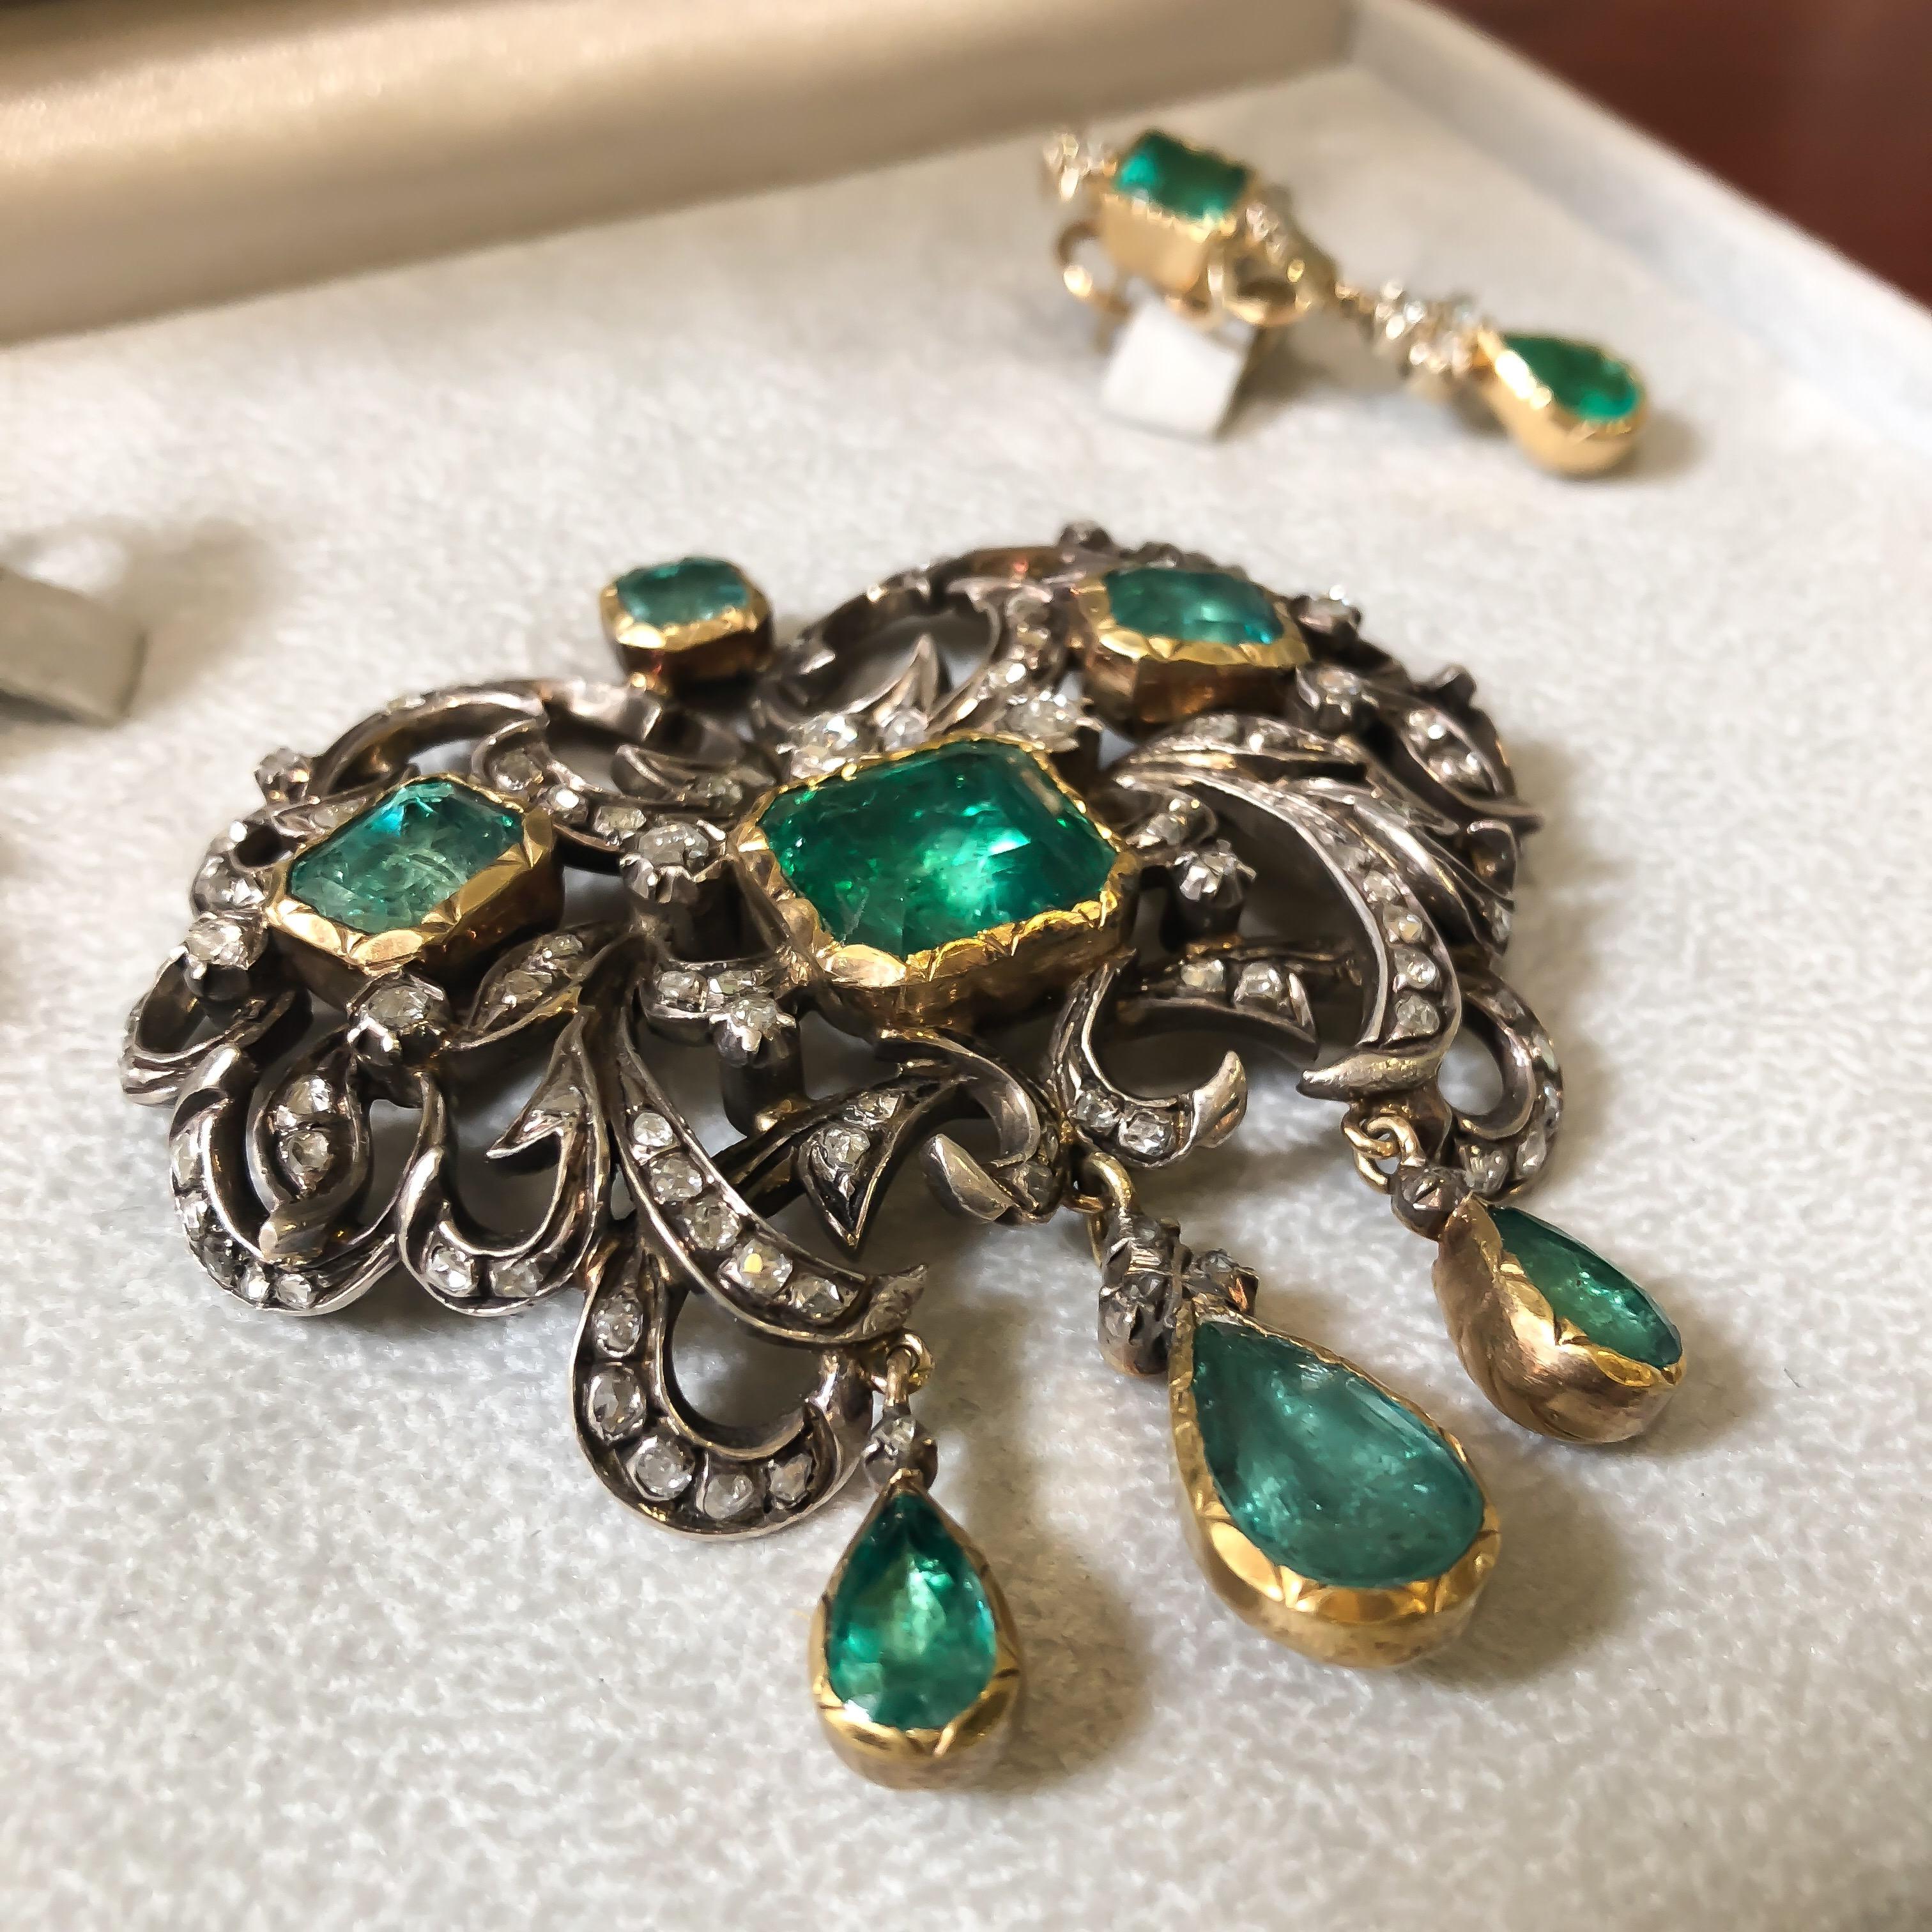 Emerald Cut Antique Victorian Natural Emerald and Diamond Brooch and Earrings 